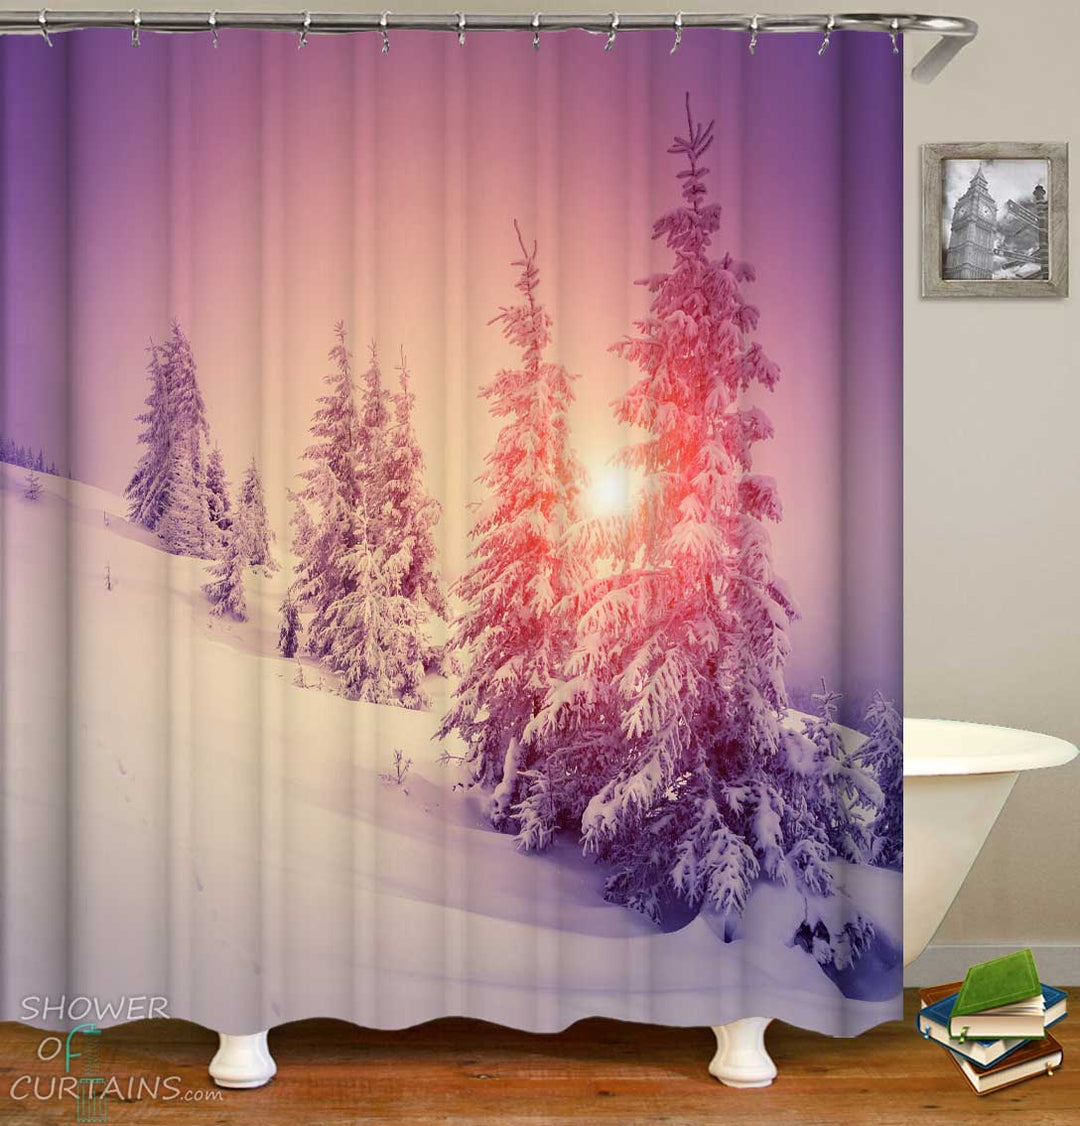 Shower Curtains with Sunset over the Snowy Mountain